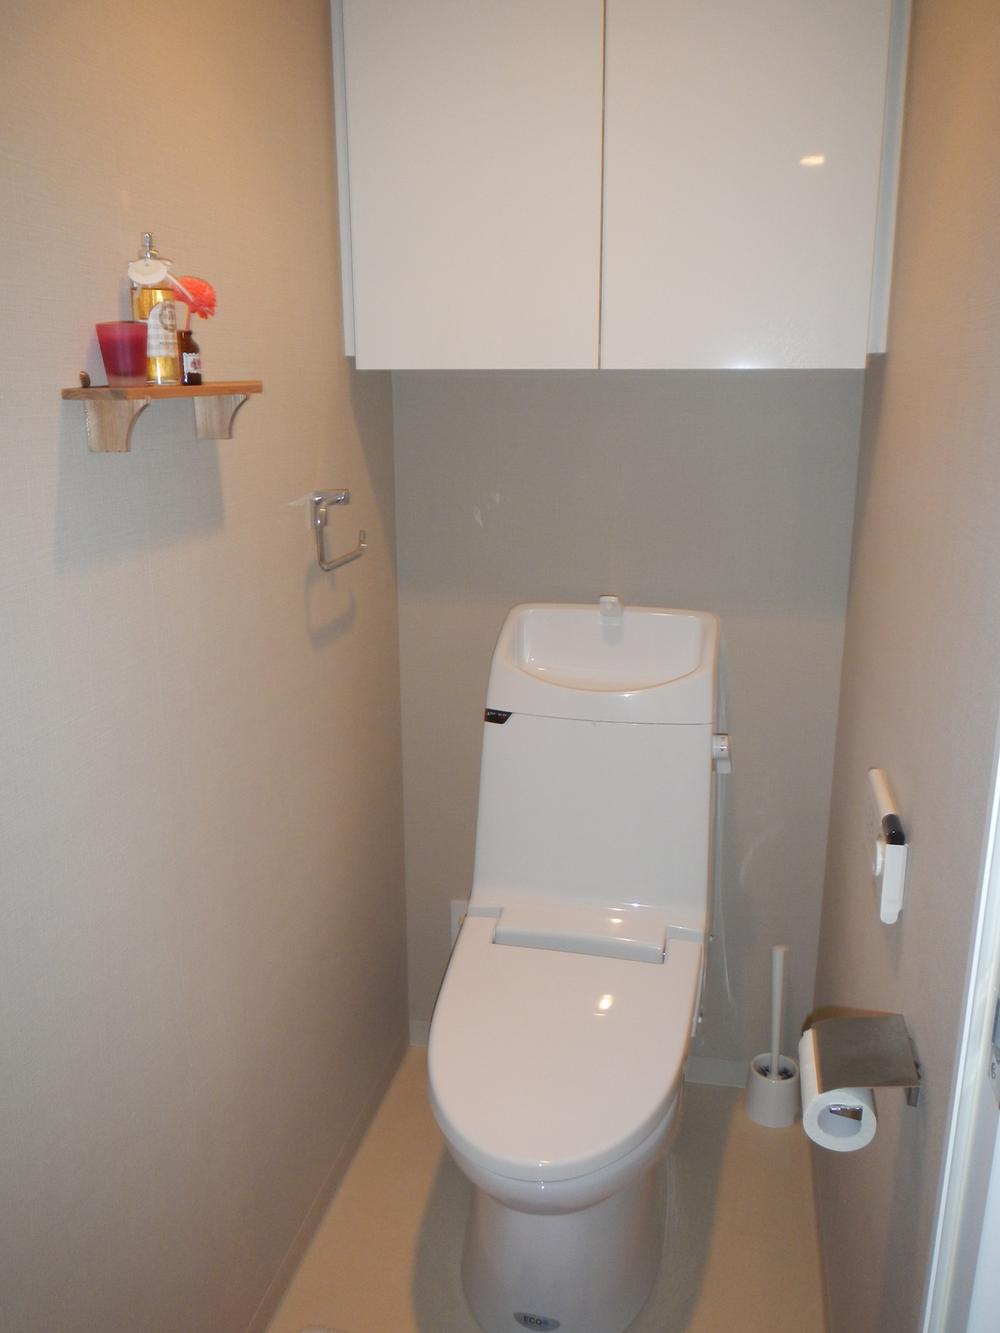 Toilet. With hanging cupboard